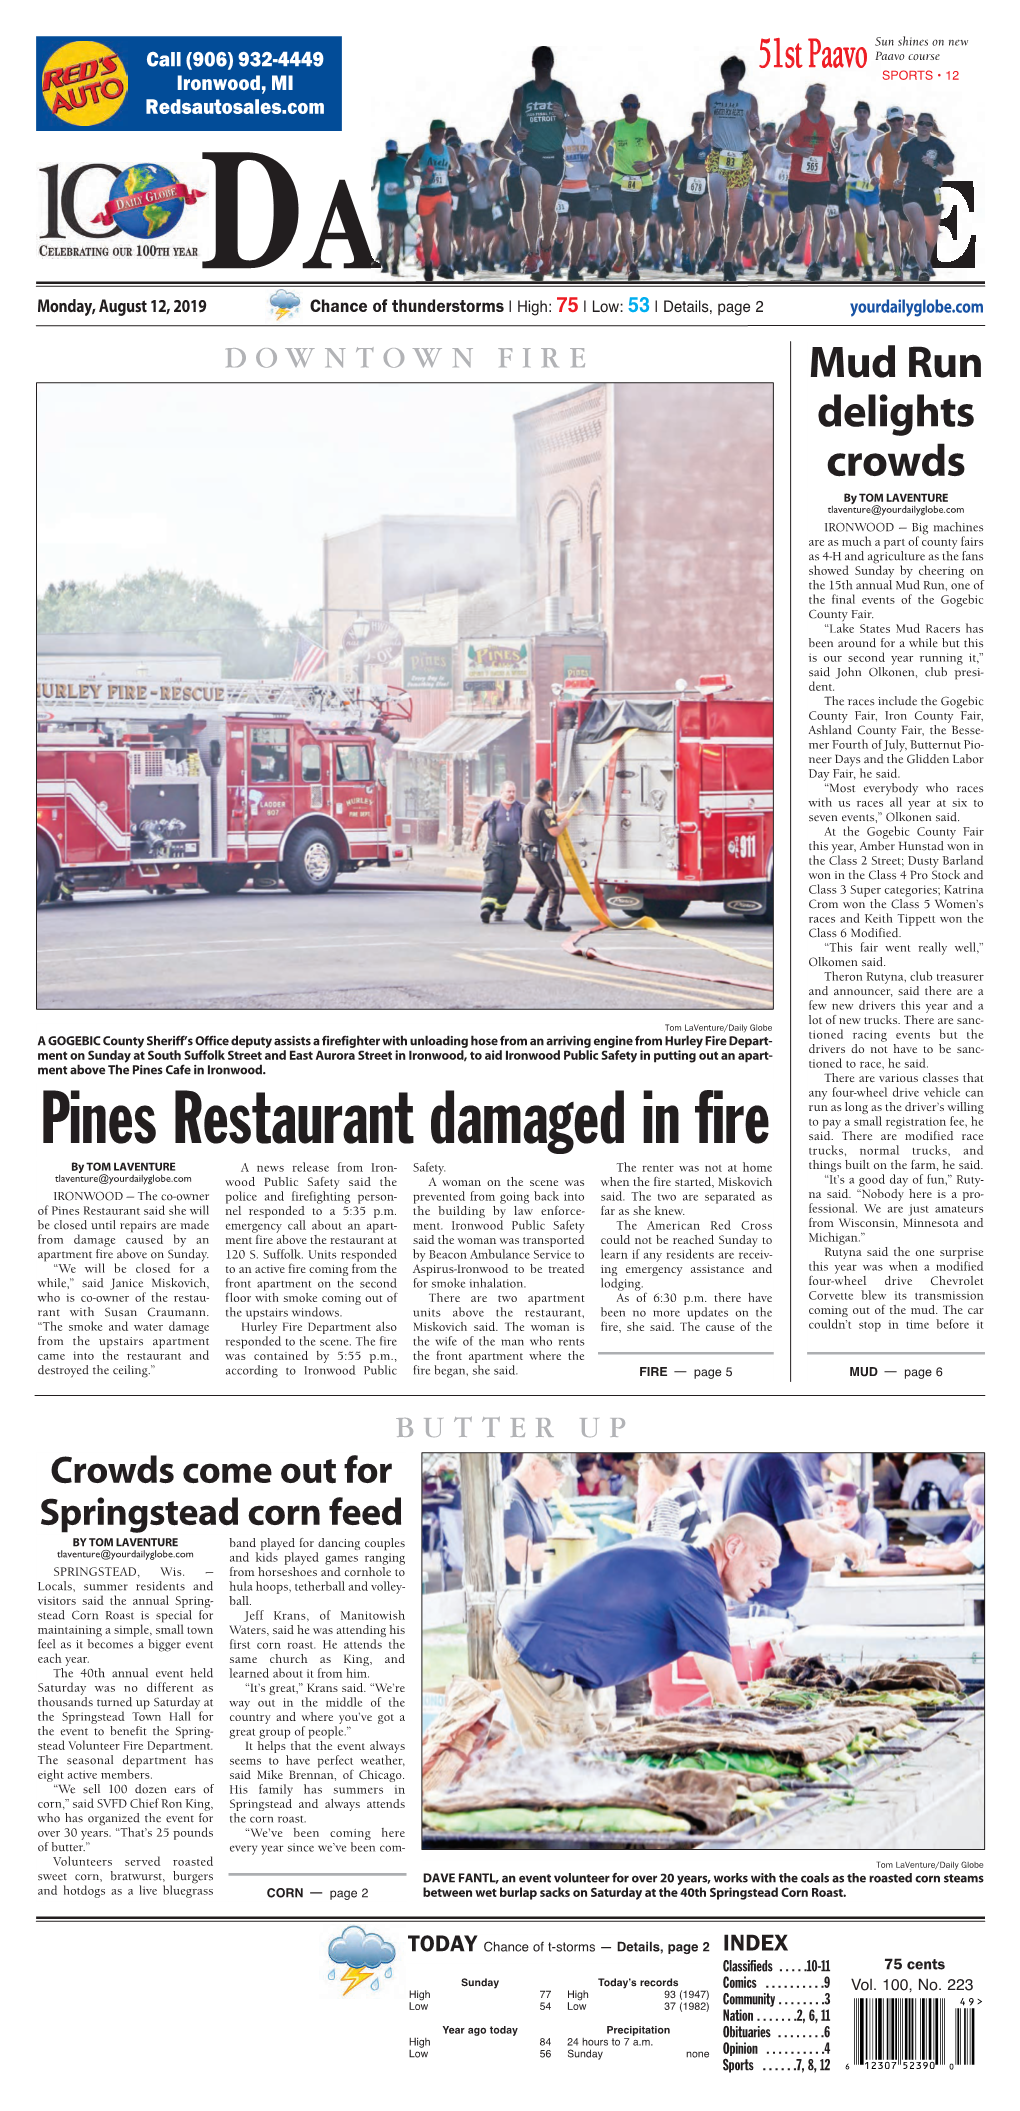 Pines Restaurant Damaged in Fire Trucks, Normal Trucks, and by TOM LAVENTURE a News Release from Iron- Safety